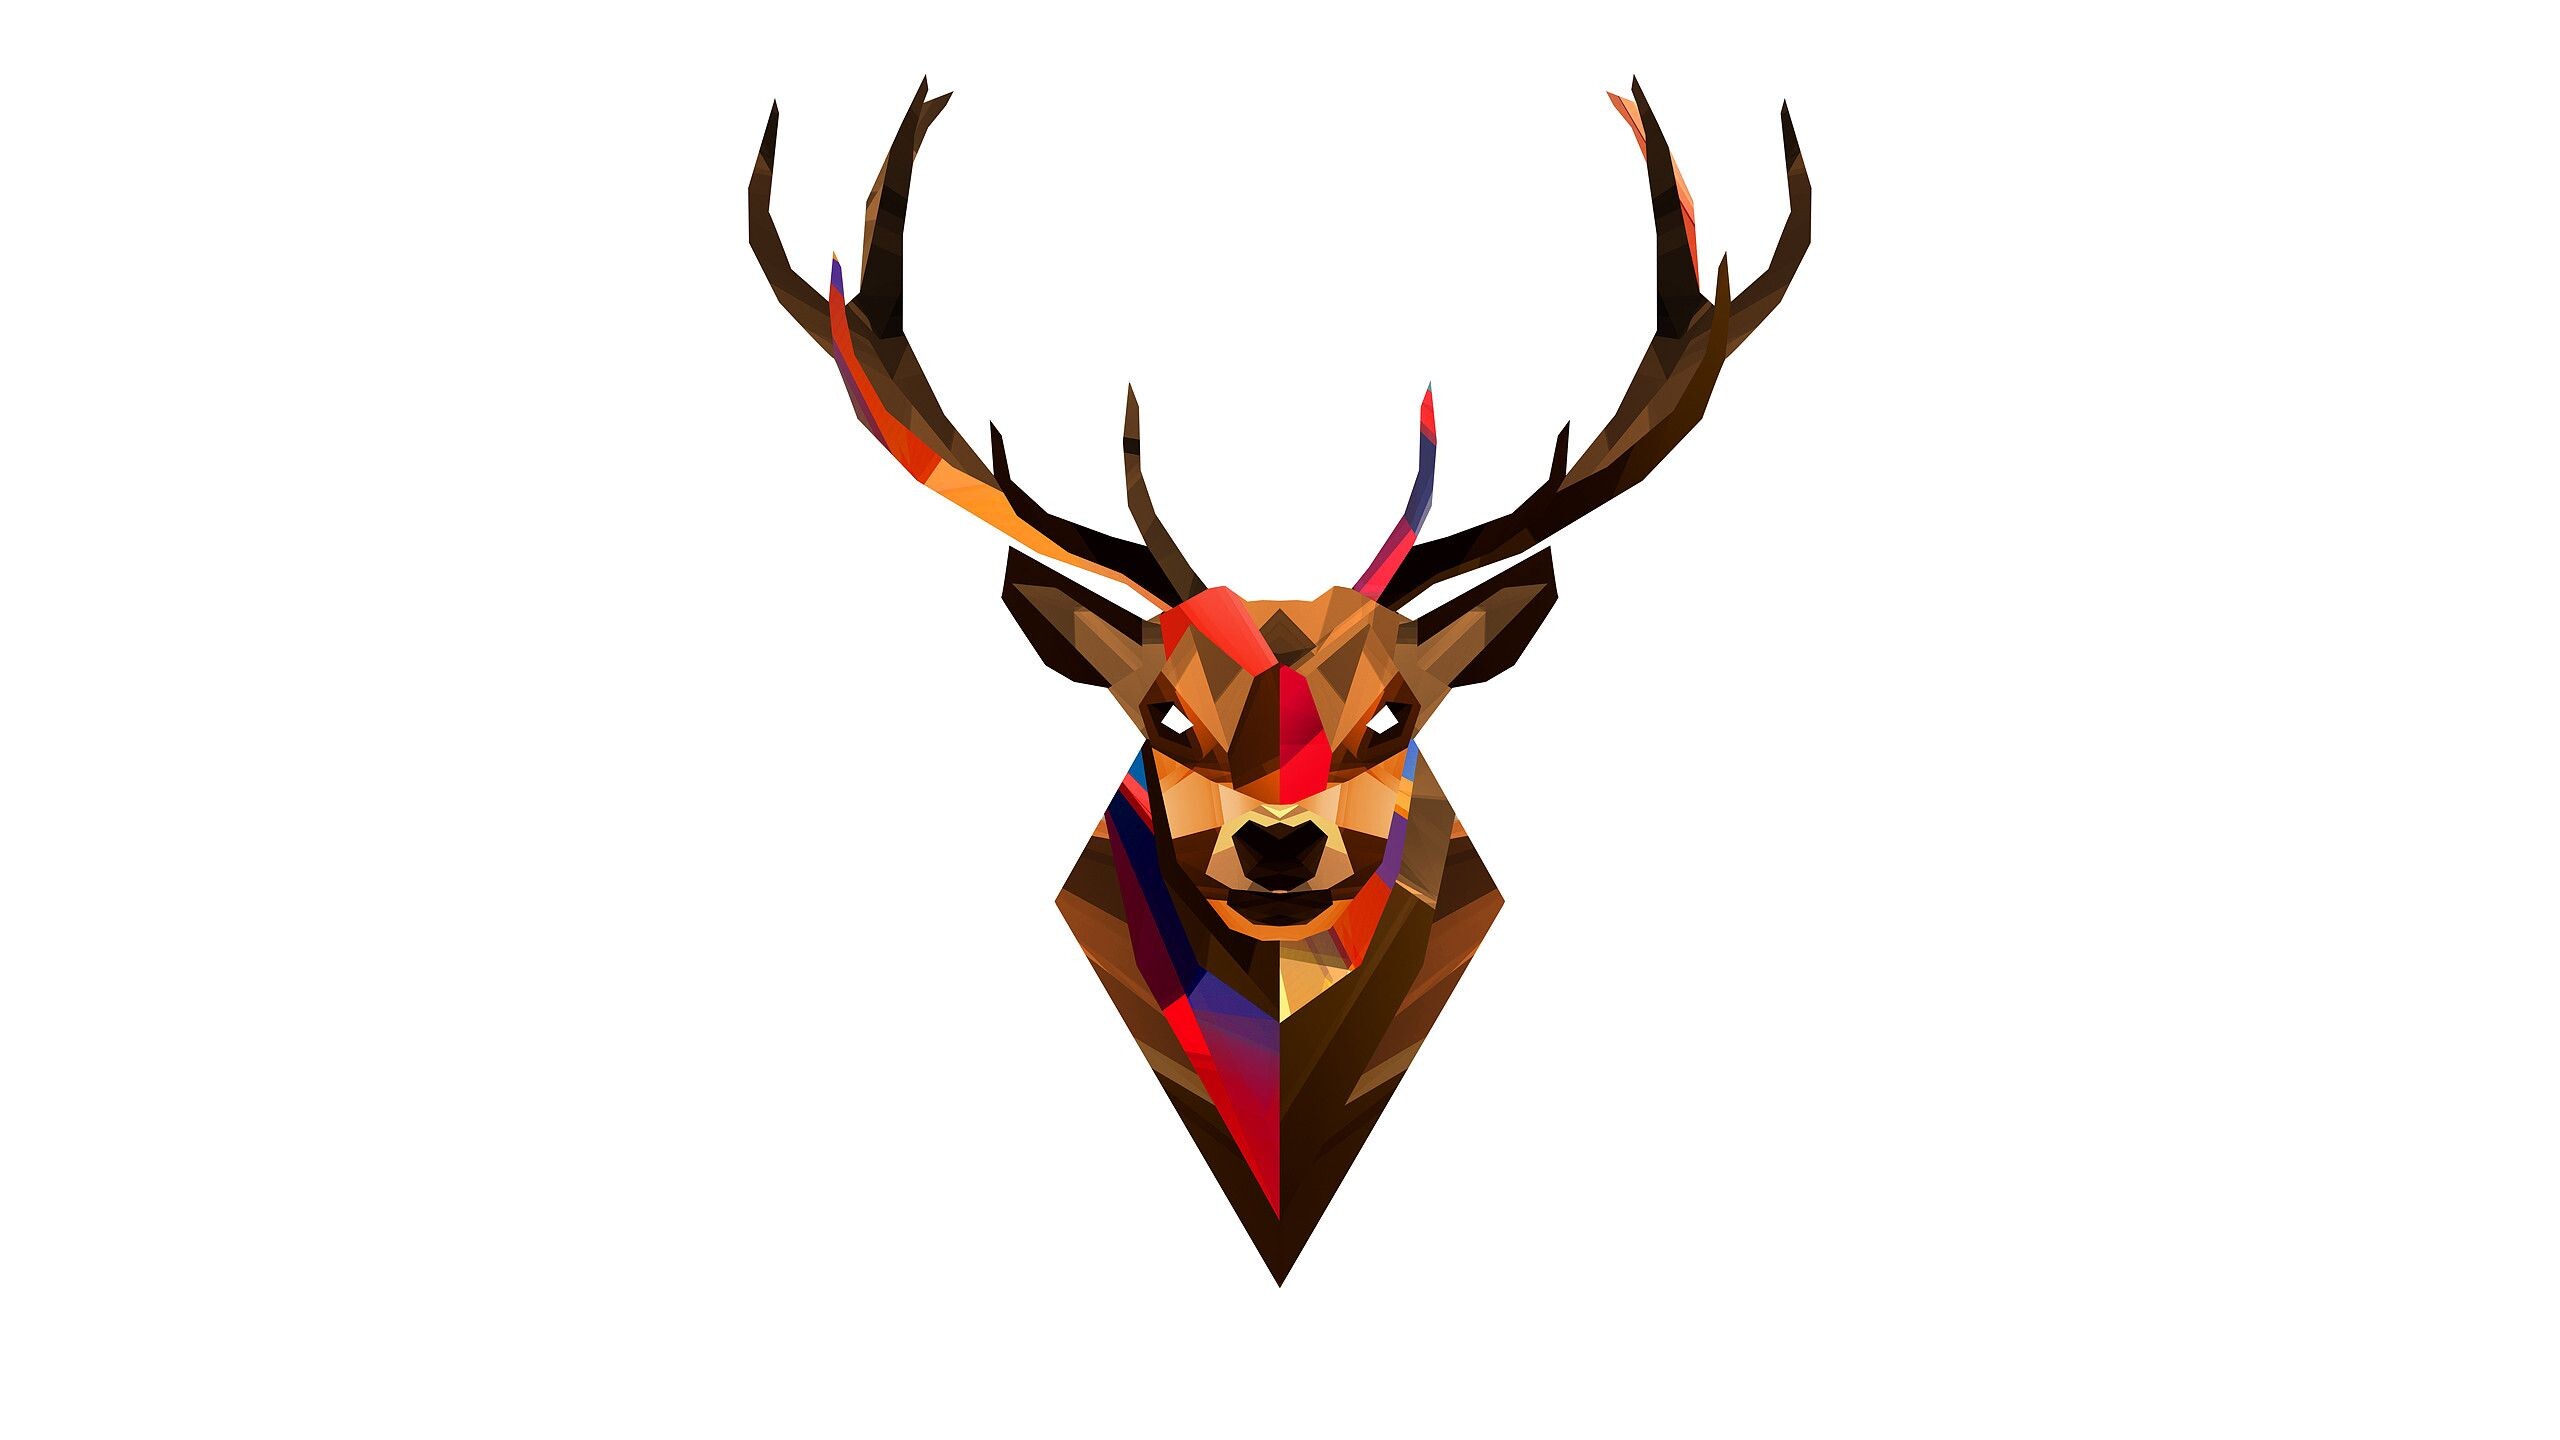 Geometric Animal: Art that uses straight and curved lines and color to form shapes, Deer. 2560x1440 HD Background.